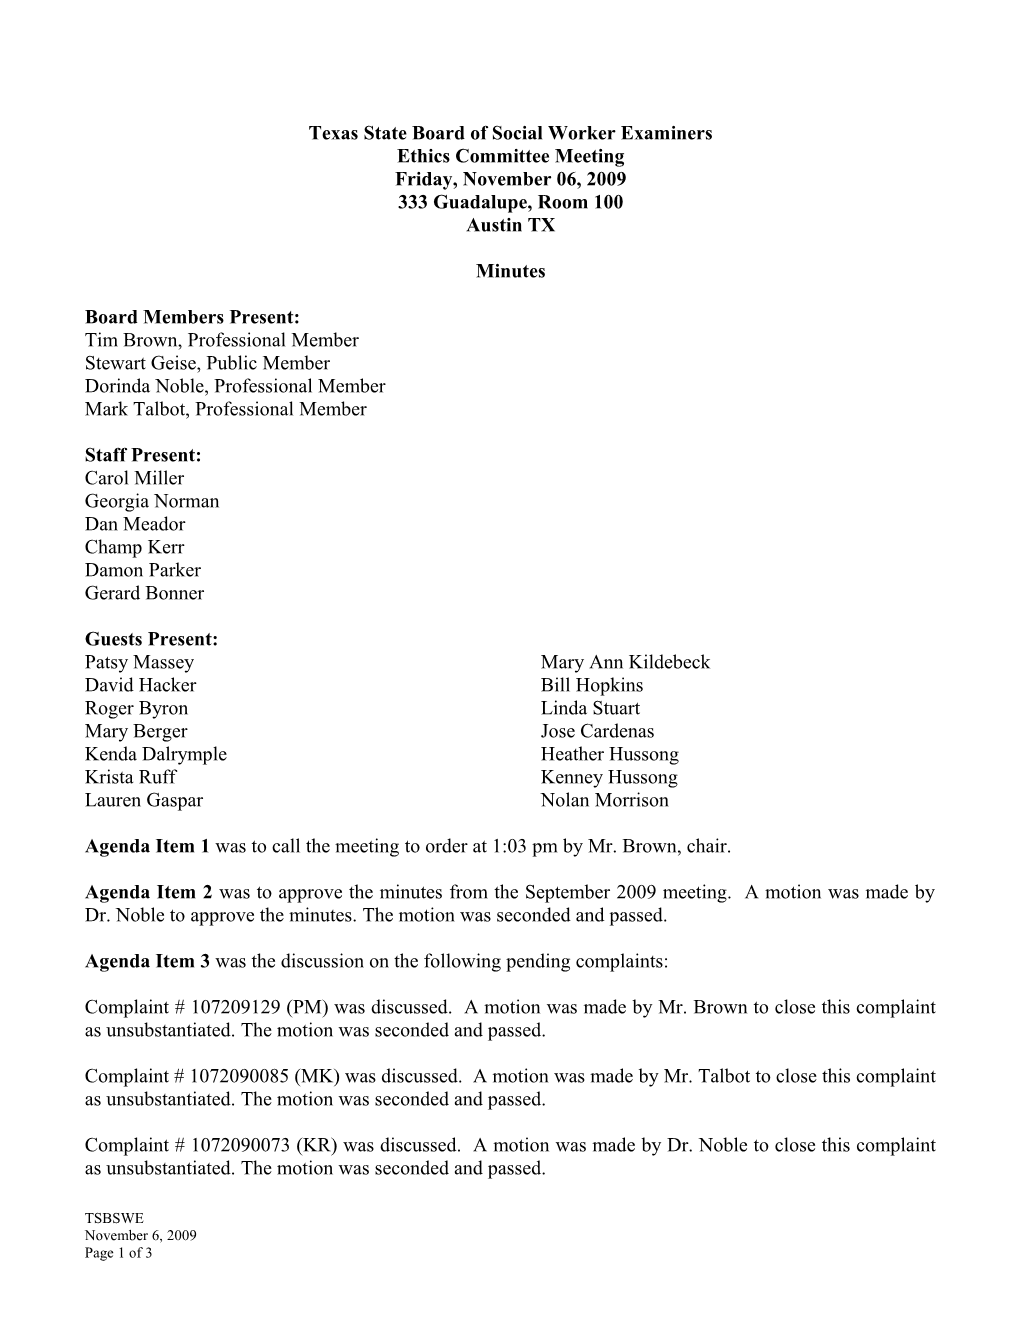 Ethics Committee Minutes November 2009